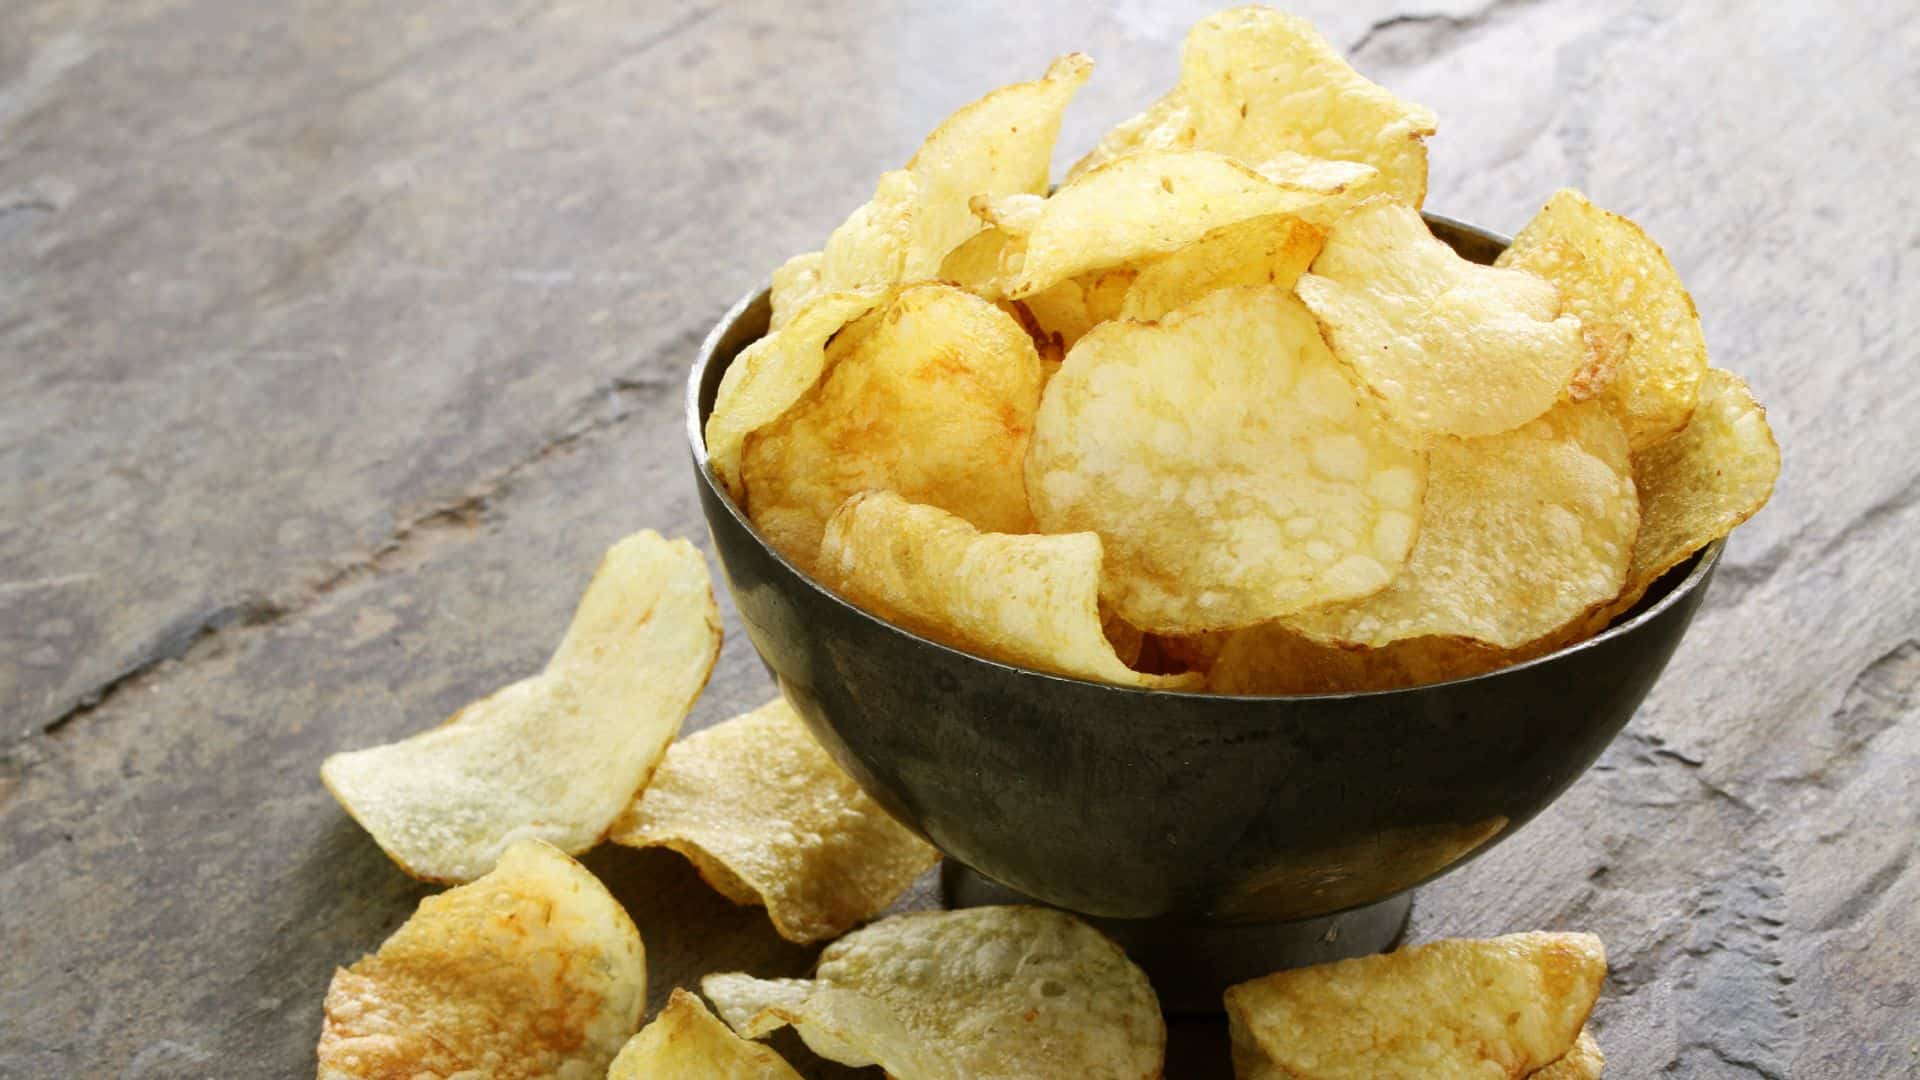 Is It Dangerous To Eat Expired Potato Chips? - Yahoo Sports